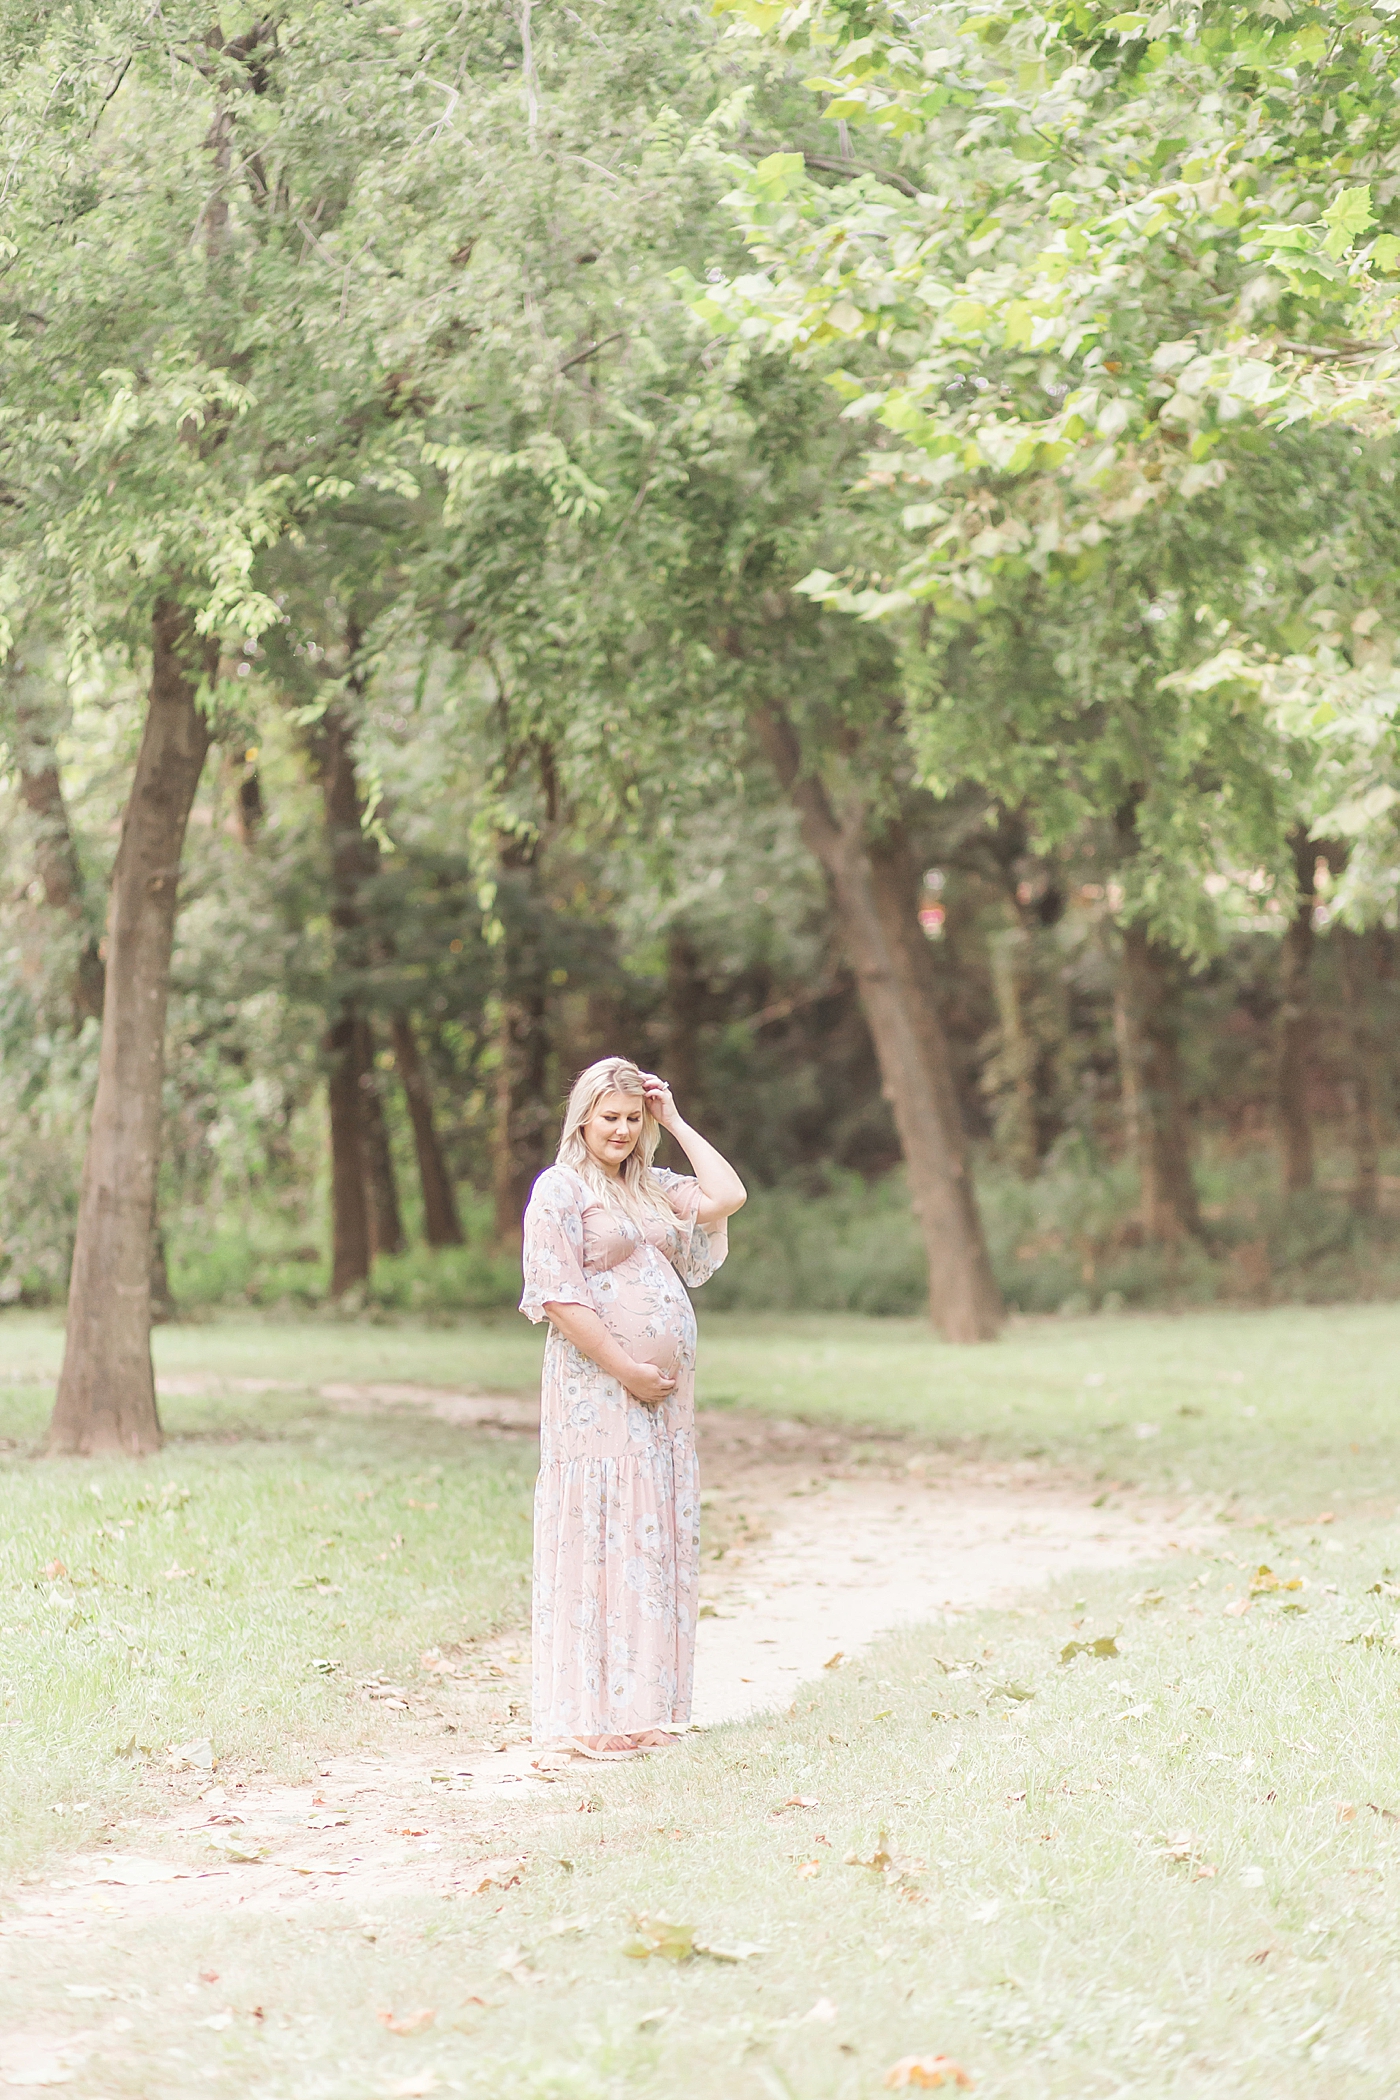 Pregnancy photos for Mom-to-be. Photo by Fresh Light Photography.